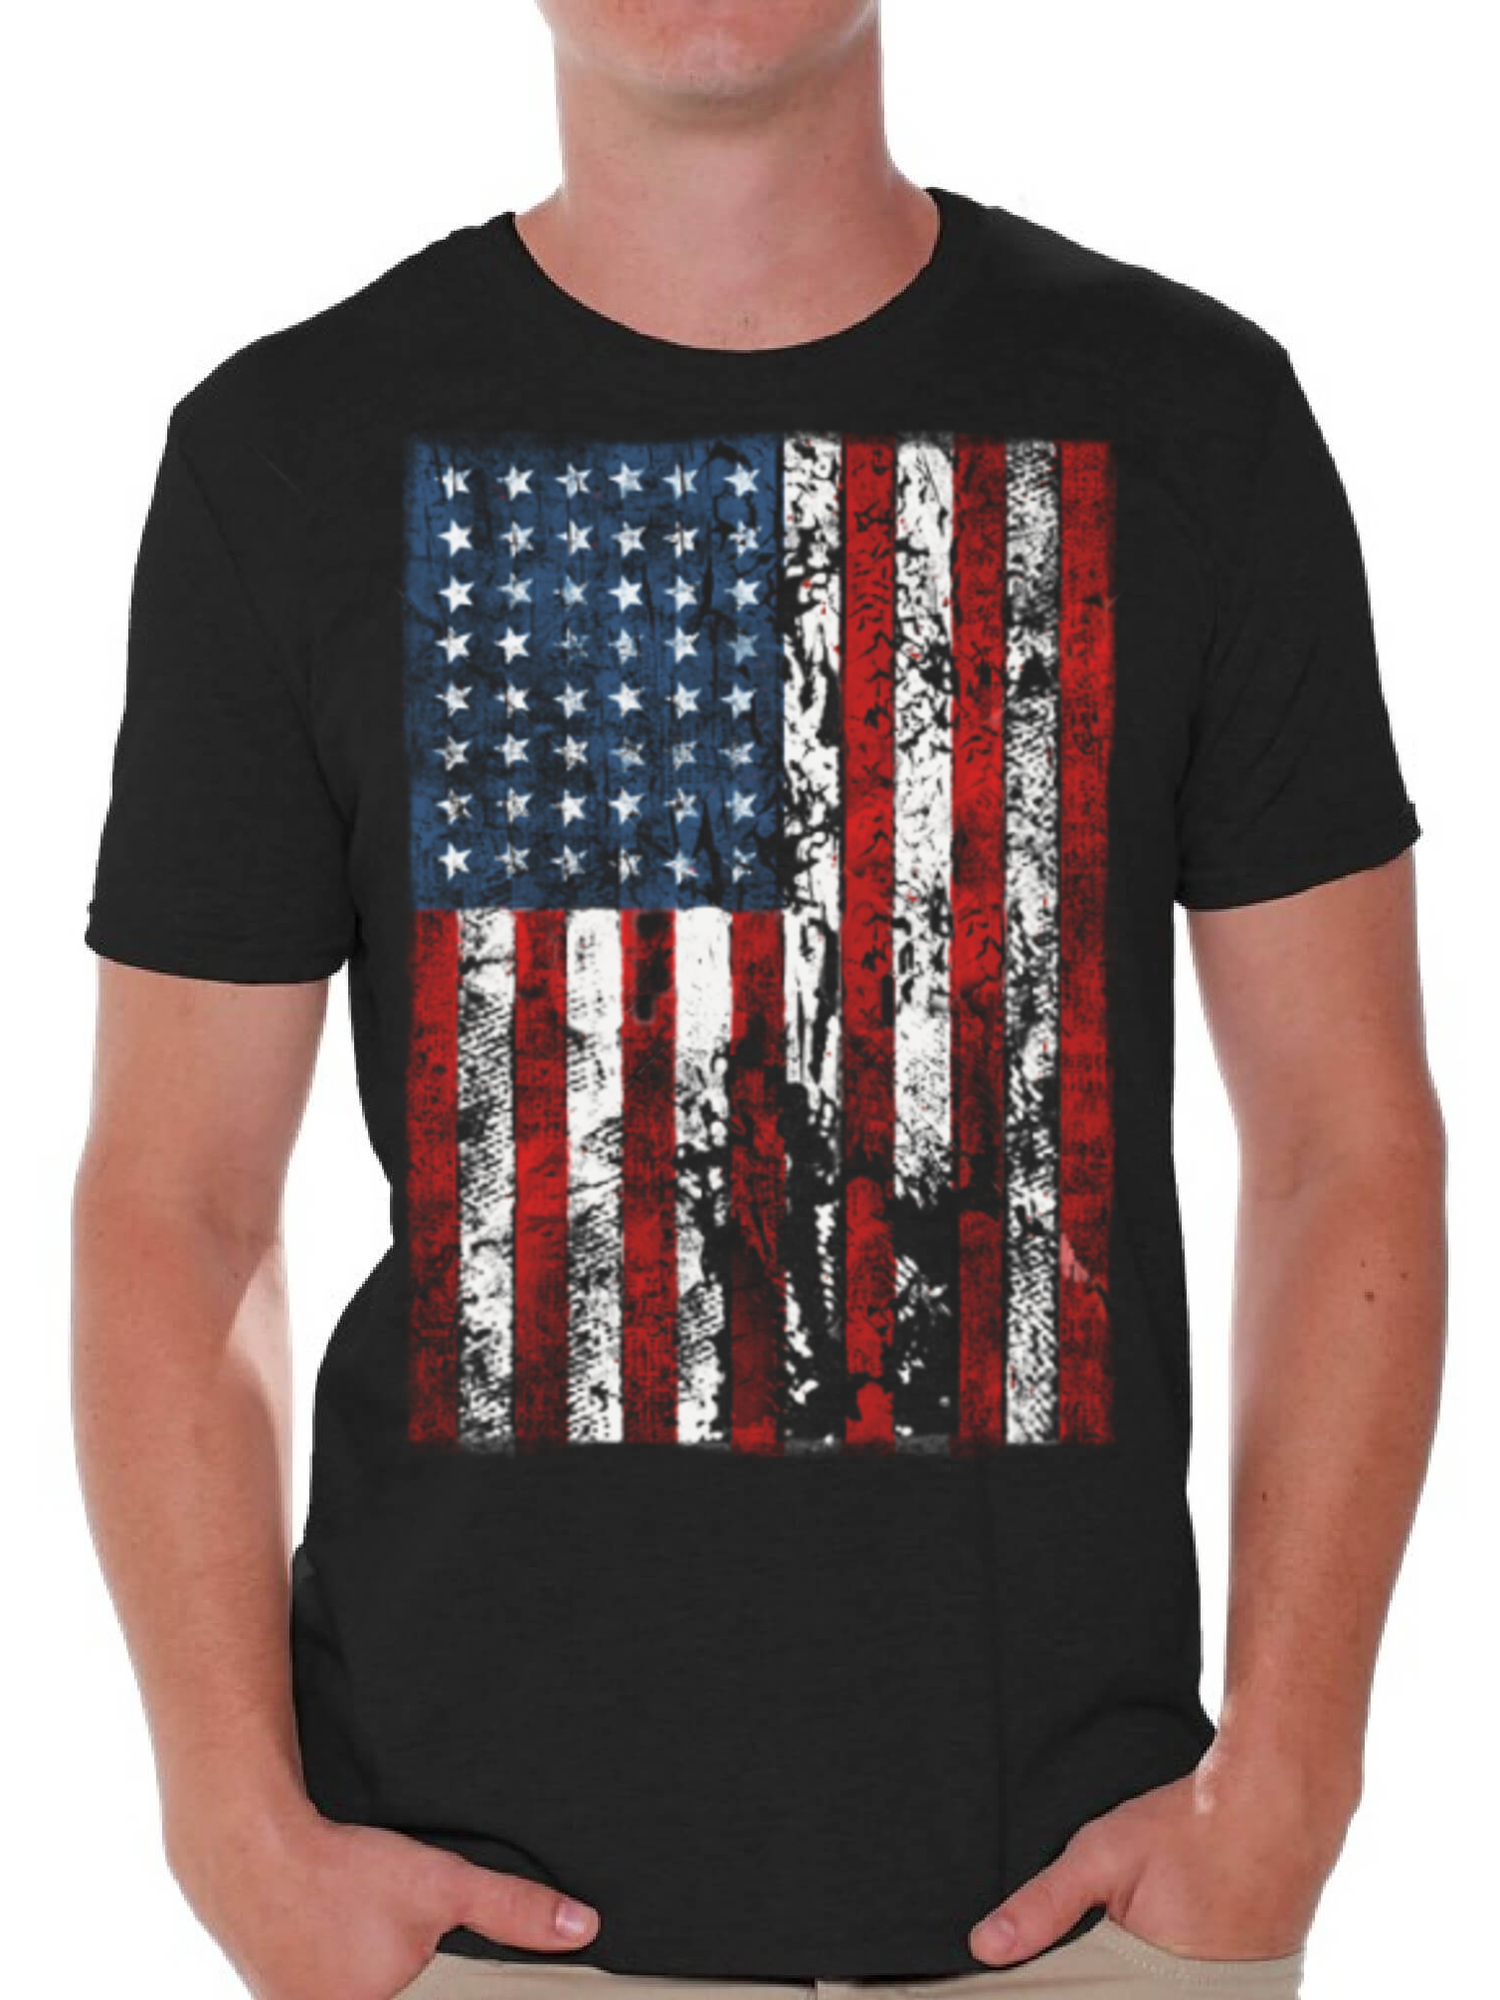 Awkward Styles Men's USA Flag Distressed Graphic T-shirt Tops 4th of July Independence Day - image 1 of 4